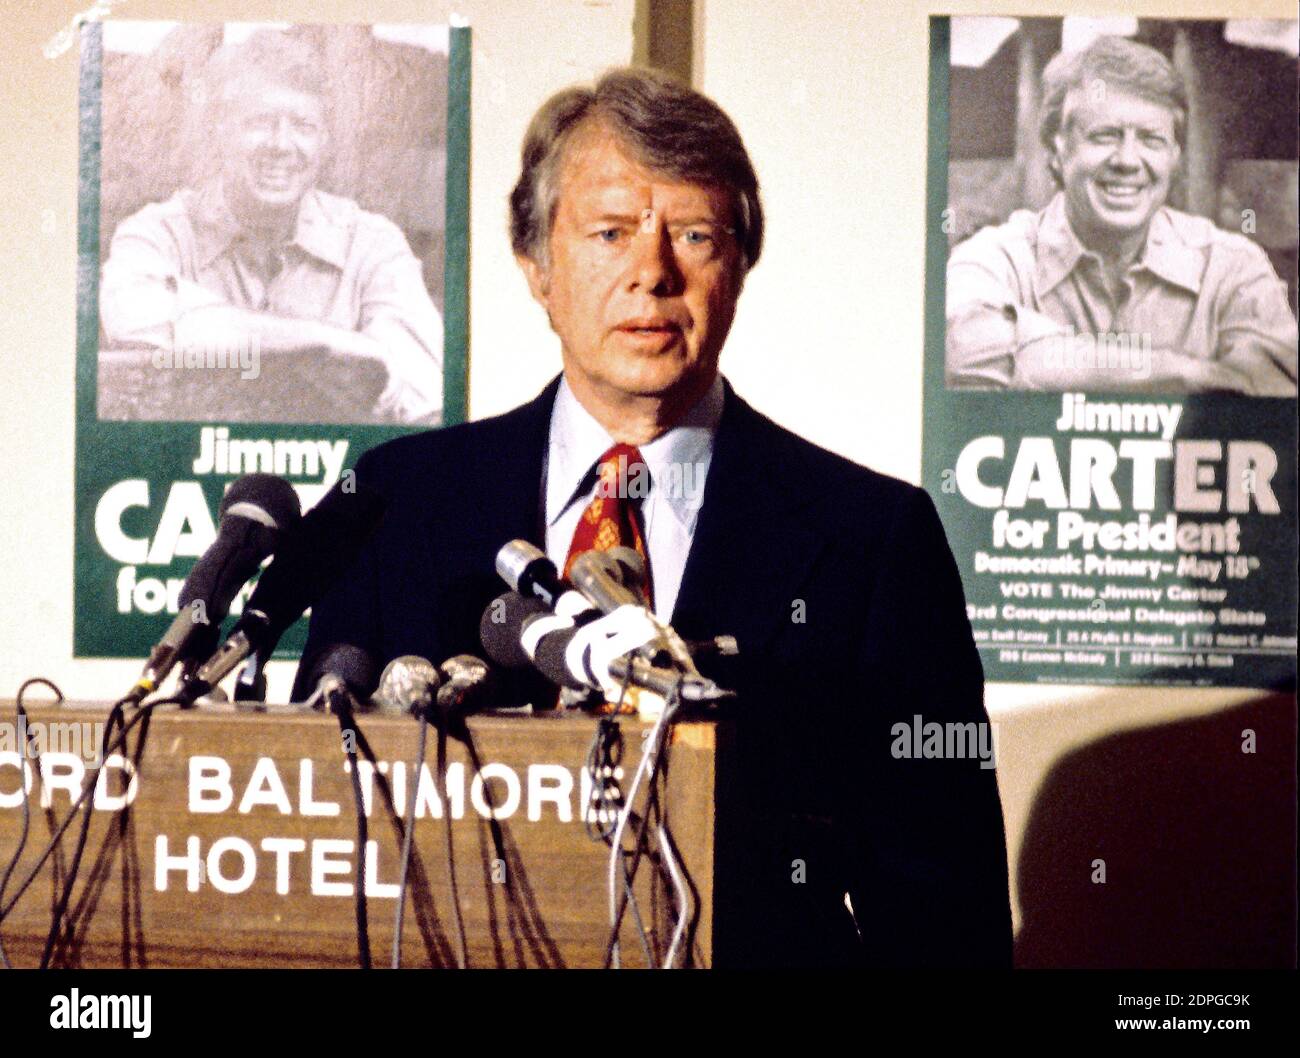 Governor Jimmy Carter (Democrat of Georgia) a candidate for the 1976 Democratic nomination for President of the United States, makes a campaign appearance in Baltimore, Maryland on May 13, 1976. Standing at right is Mayor William Donald Schaefer (Democrat of Baltimore). Photo by Arnie Sachs/CNP/ABACAPRESS.COM Stock Photo